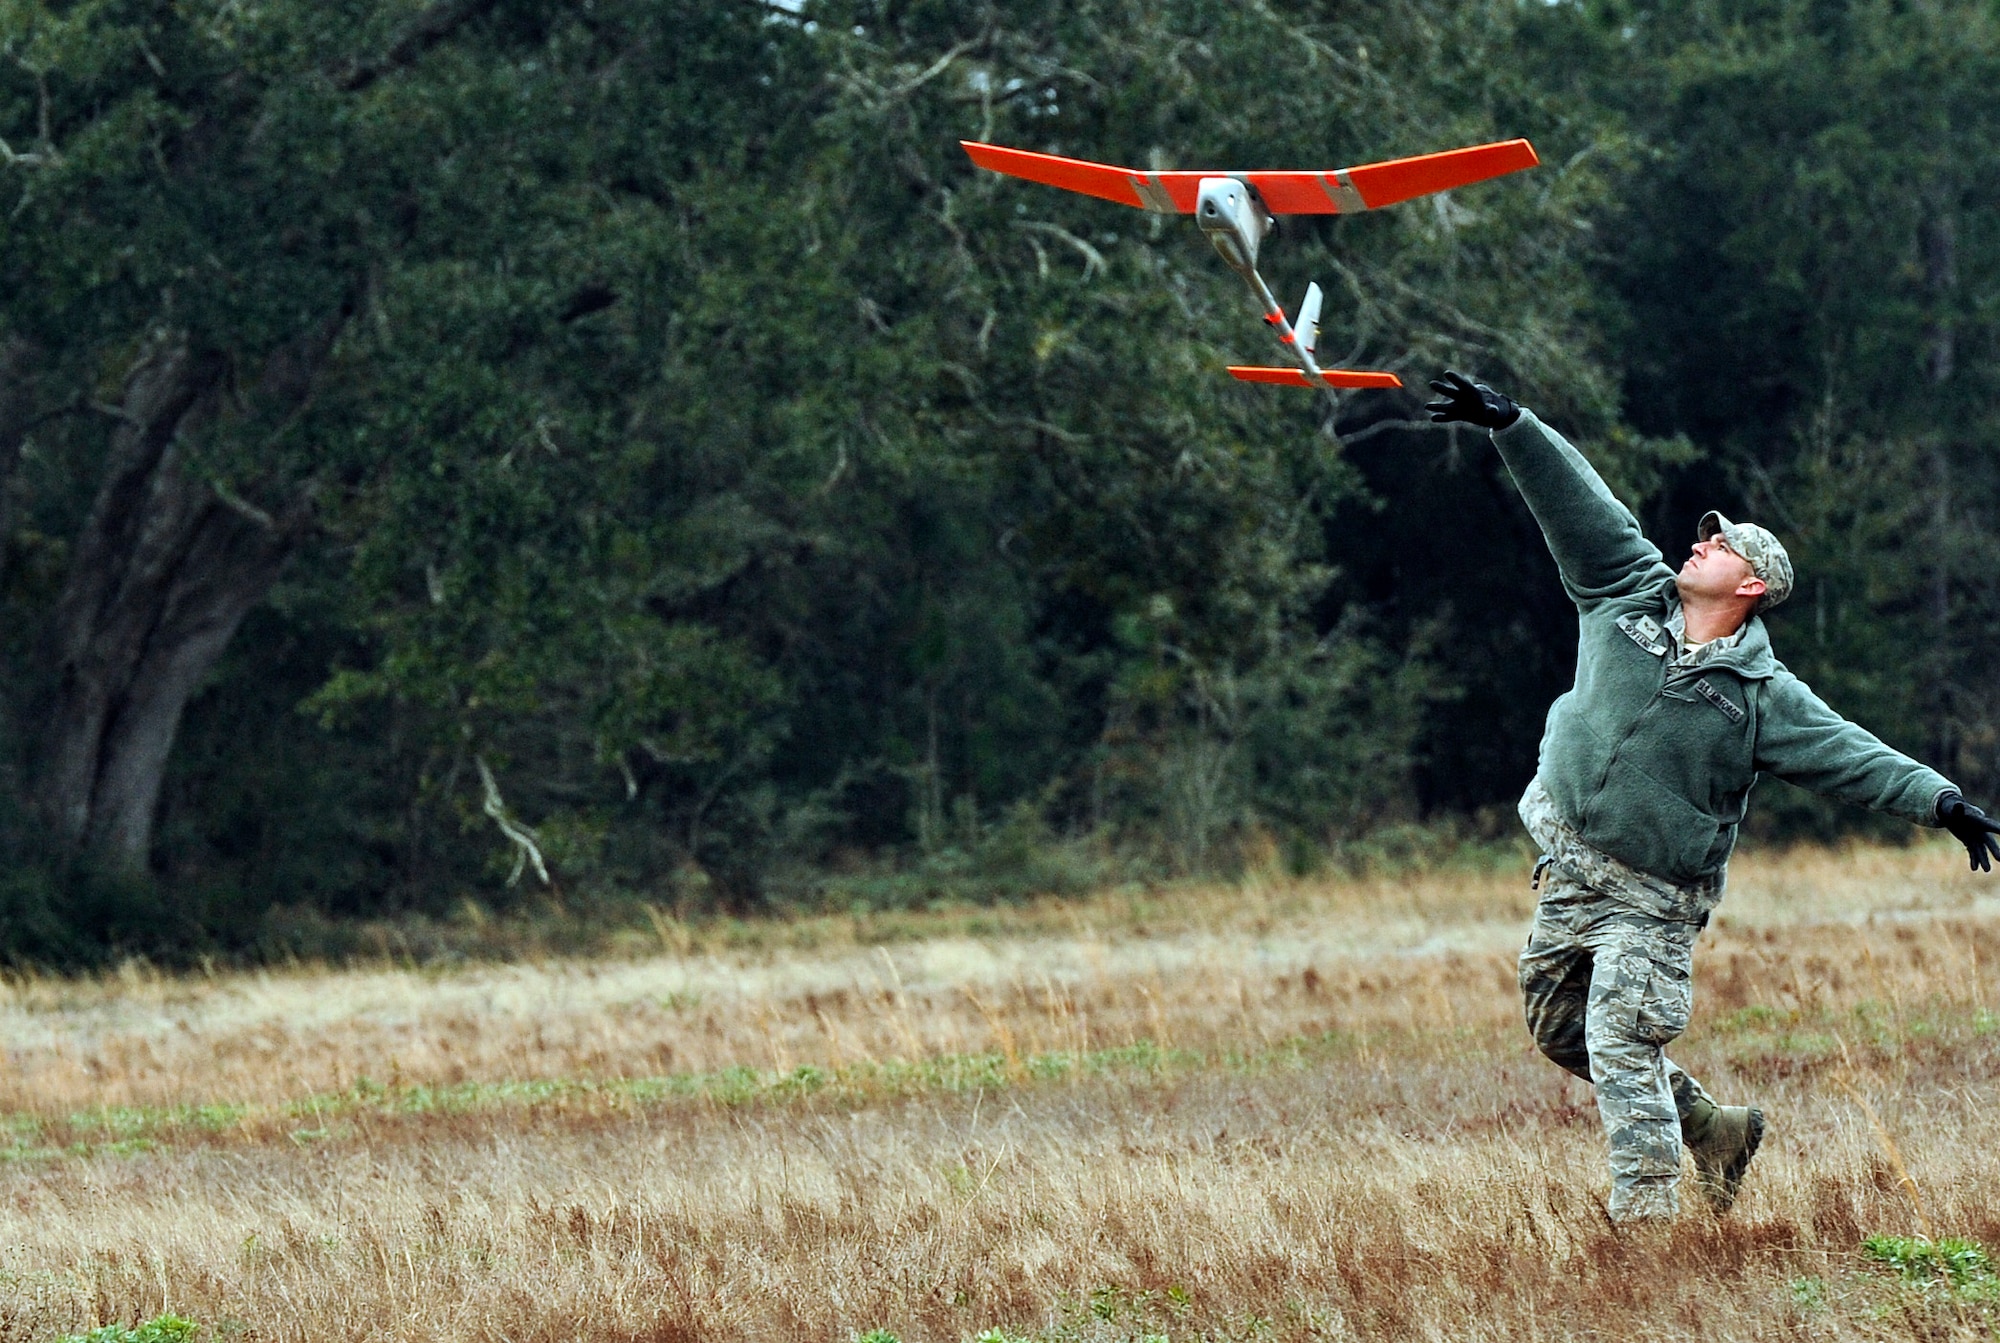 Senior Airman Andrew Goffeney, 1st Special Operations Security Forces Squadron combat arms journeyman, launches a RQ-11B Raven at Choctaw Field, Fla., March 4, 2014. Goffeney practiced launching the small unmanned aerial system, which requires a specific technique for takeoff. (U.S. Air Force photo/Senior Airman Michelle Patten)